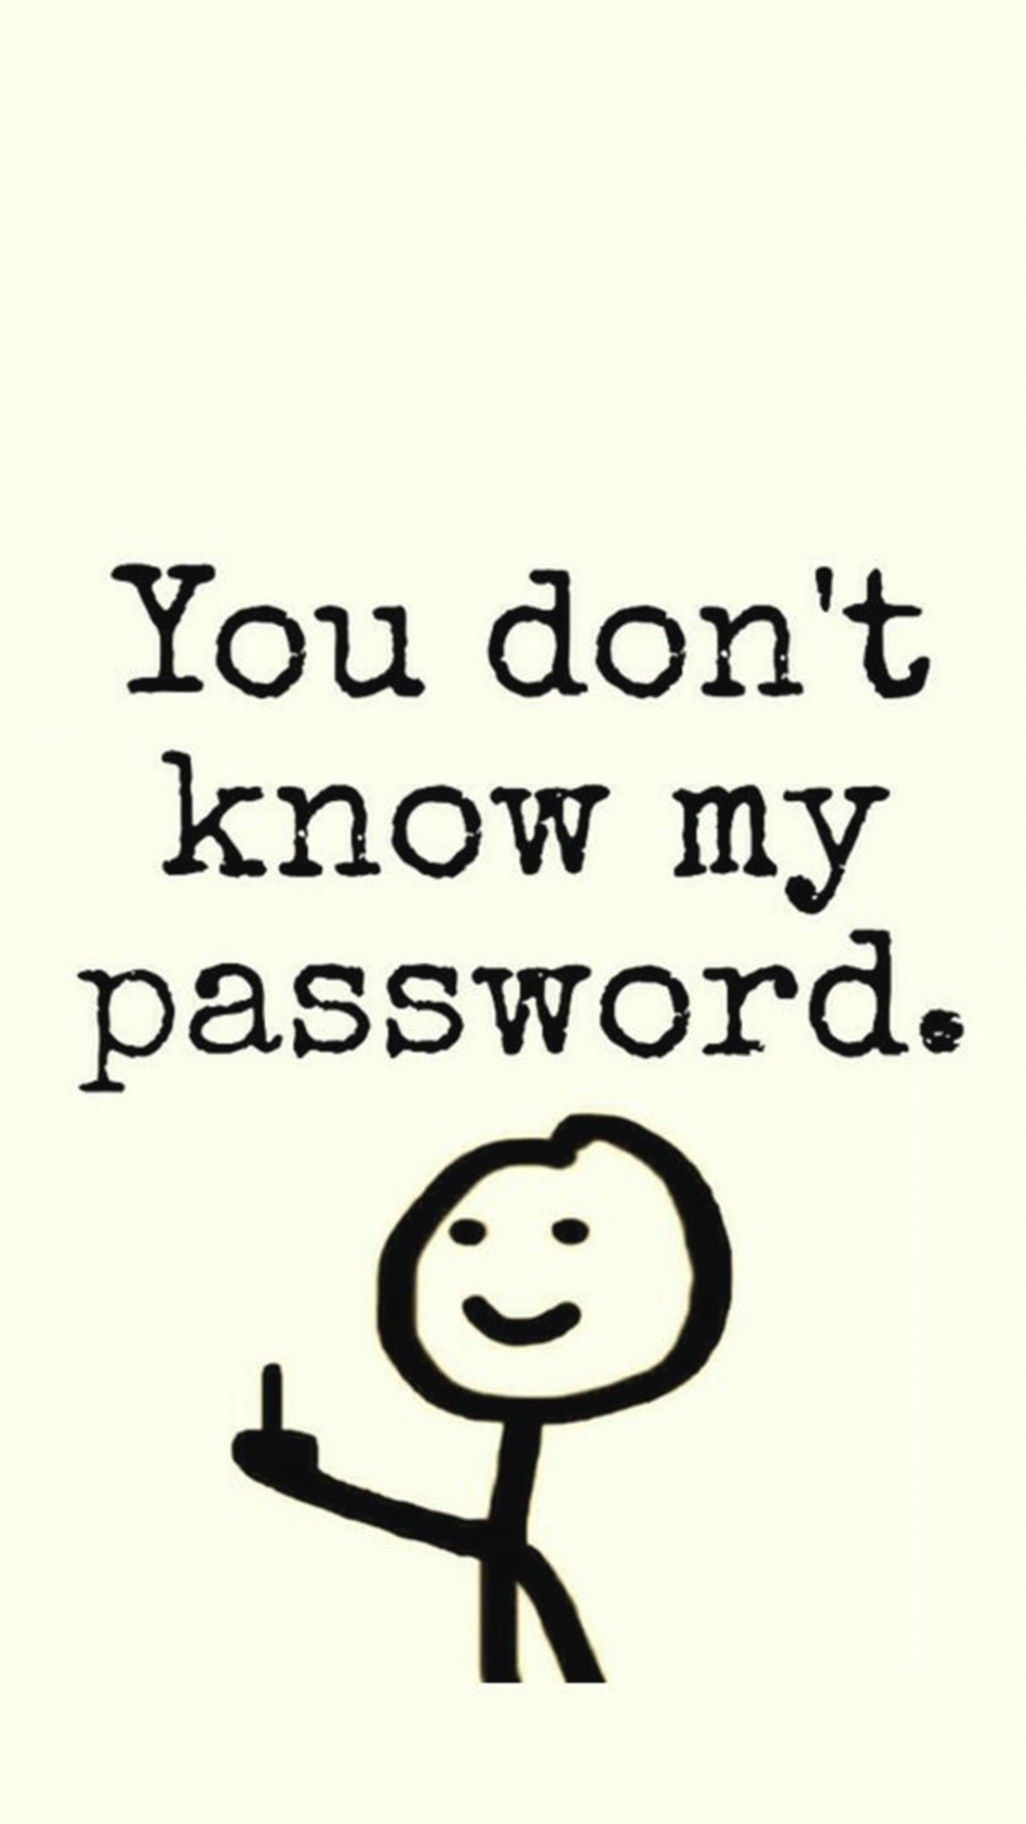 10 Latest You Don't Know My Password Wallpaper FULL HD 1080p For PC Background